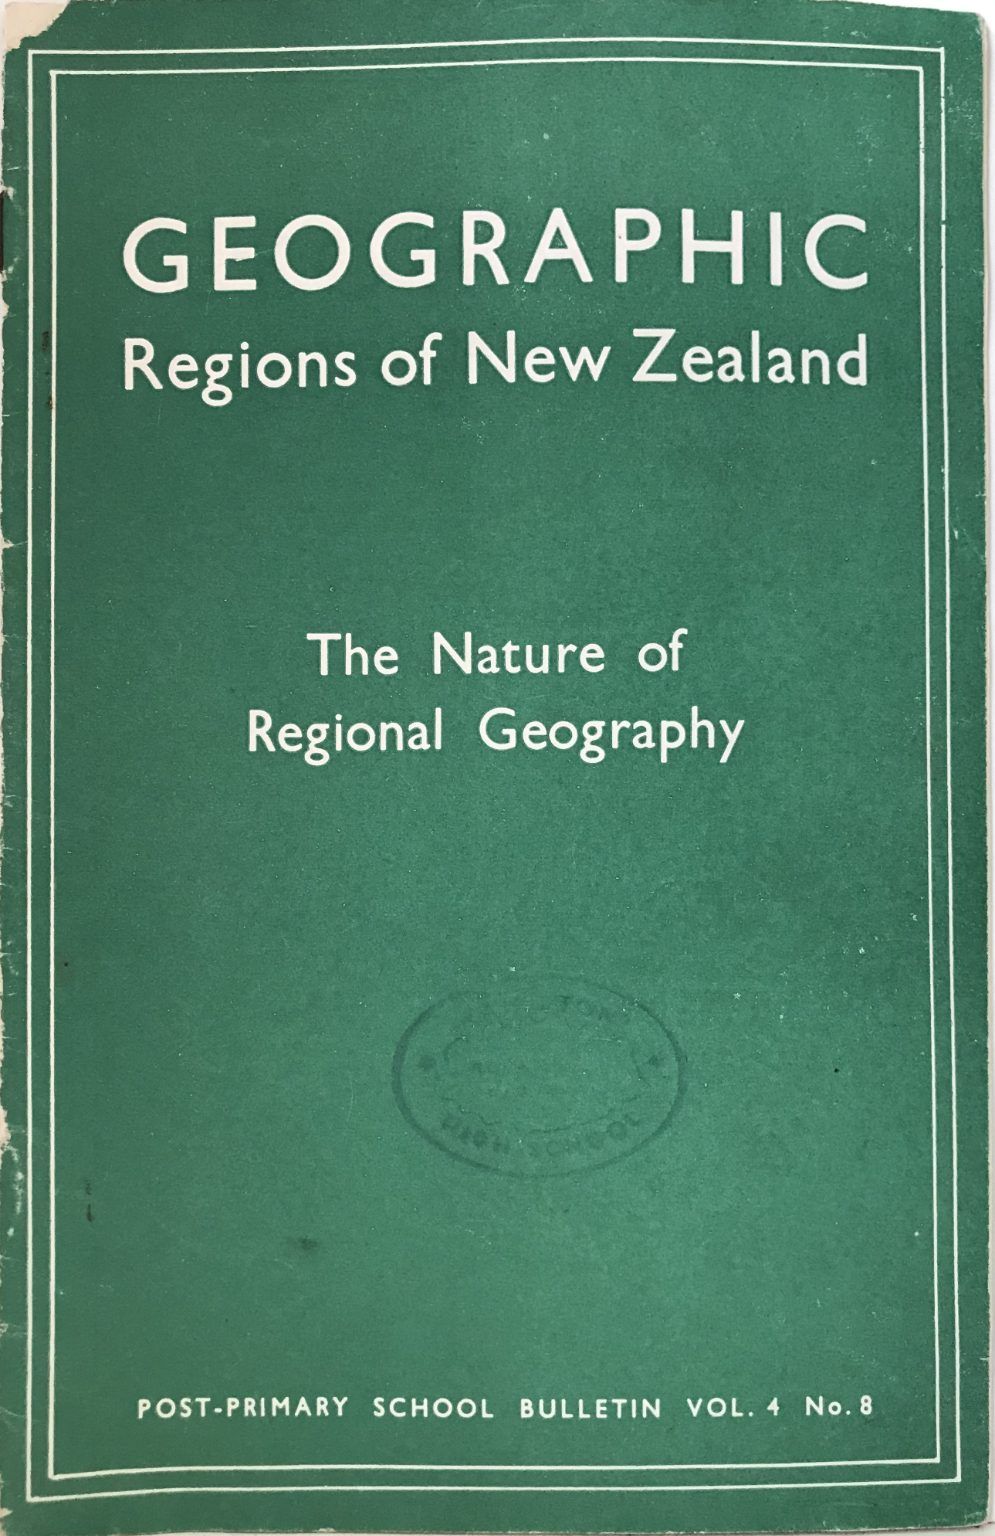 GEOGRAPHIC REGIONS OF NEW ZEALAND: The Nature of Regional Geography